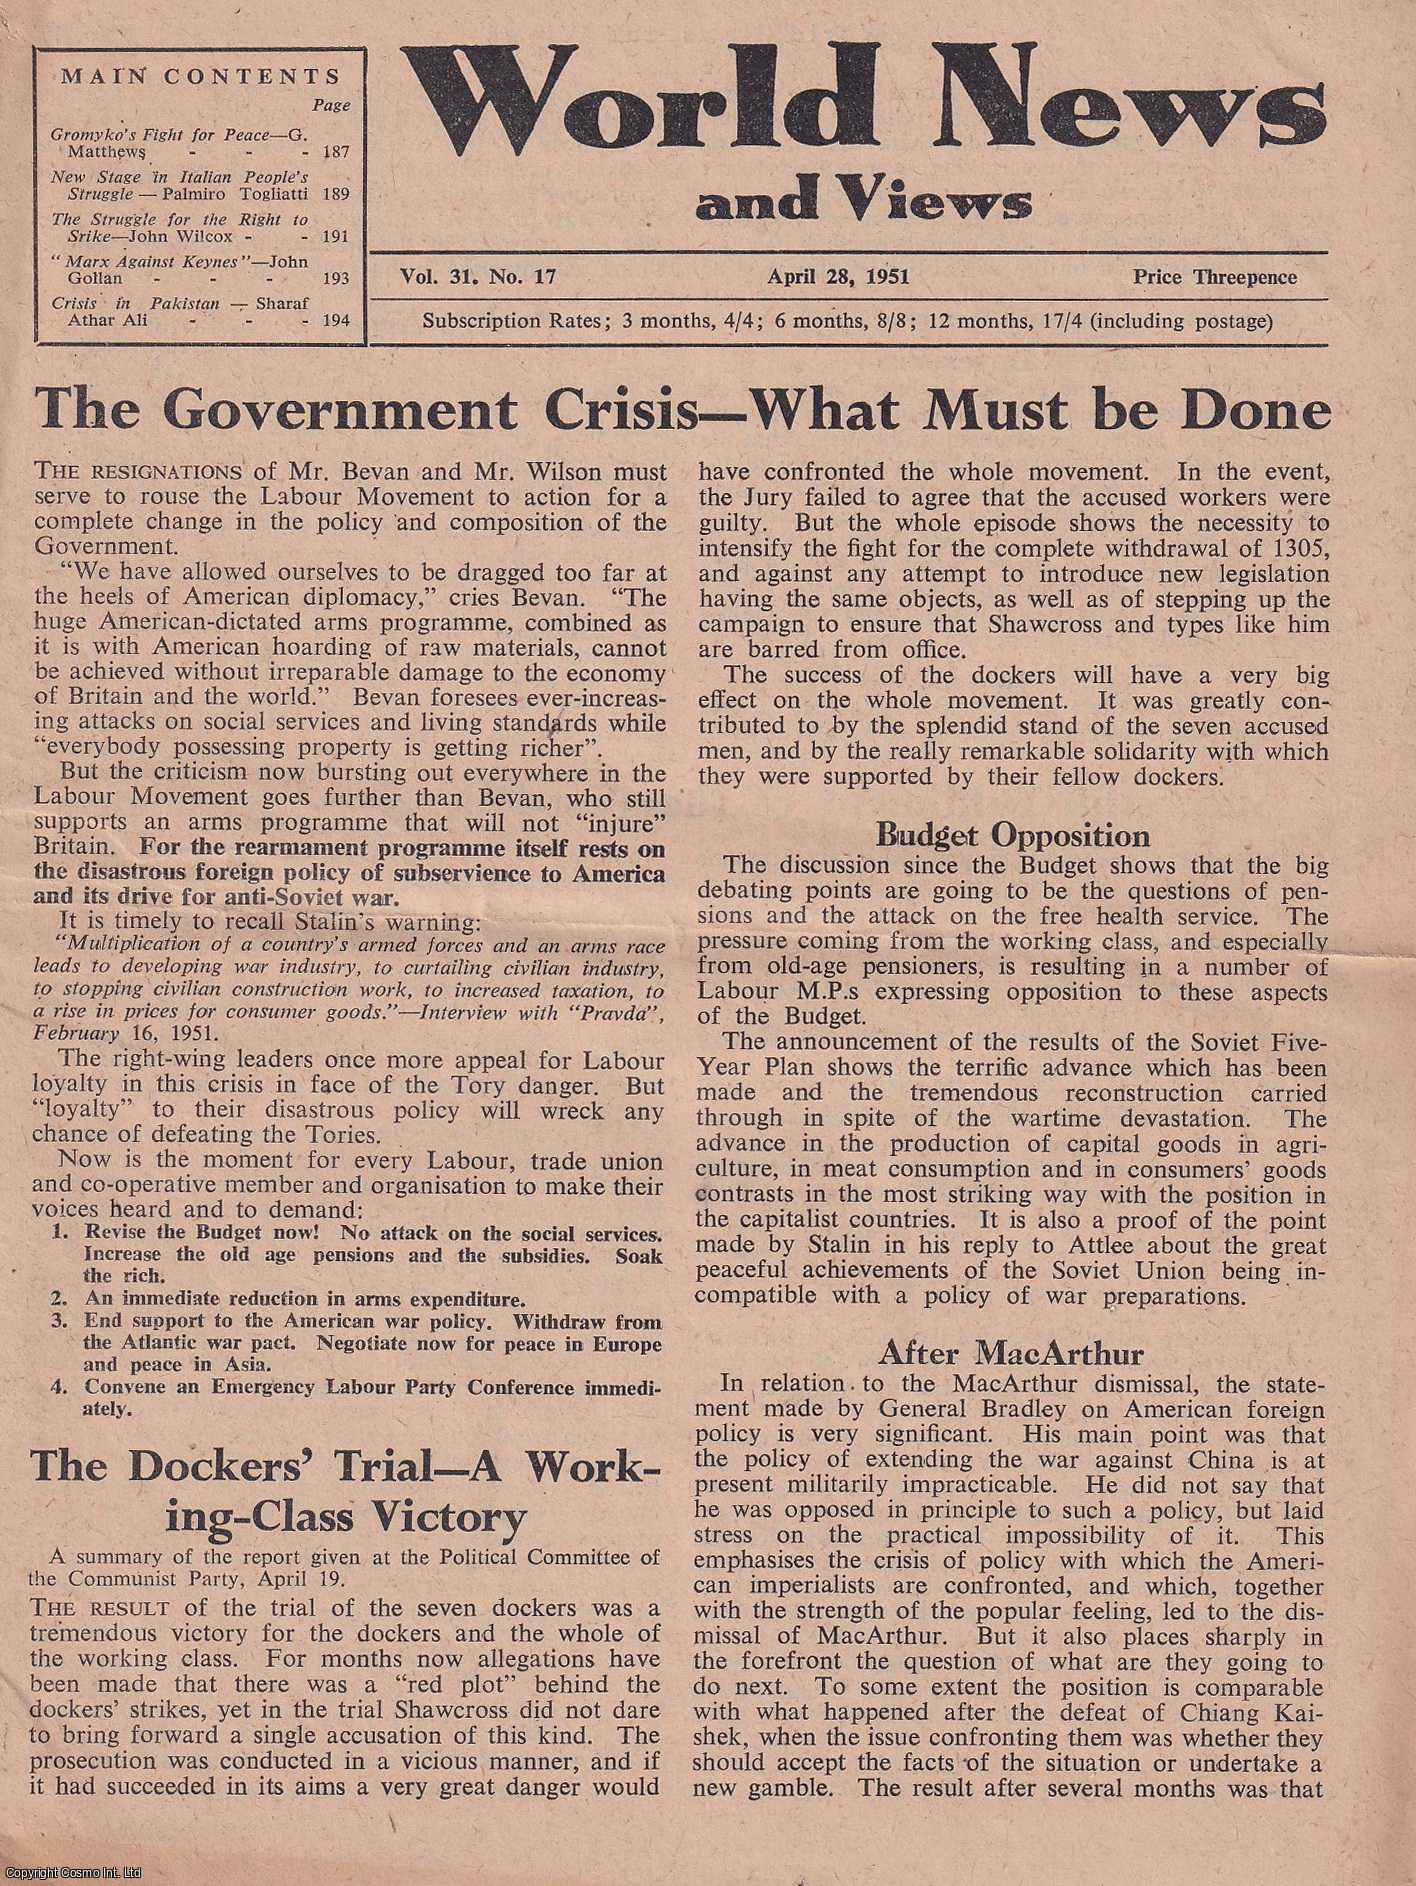 W.N. Clark - World News and Views, April 28, 1951. The Government Crisis - What Must be Done; The Dockers' Trial, A Working Class Victory; Gromyko's Fight for Peace; The Struggle for the Right to Strike.